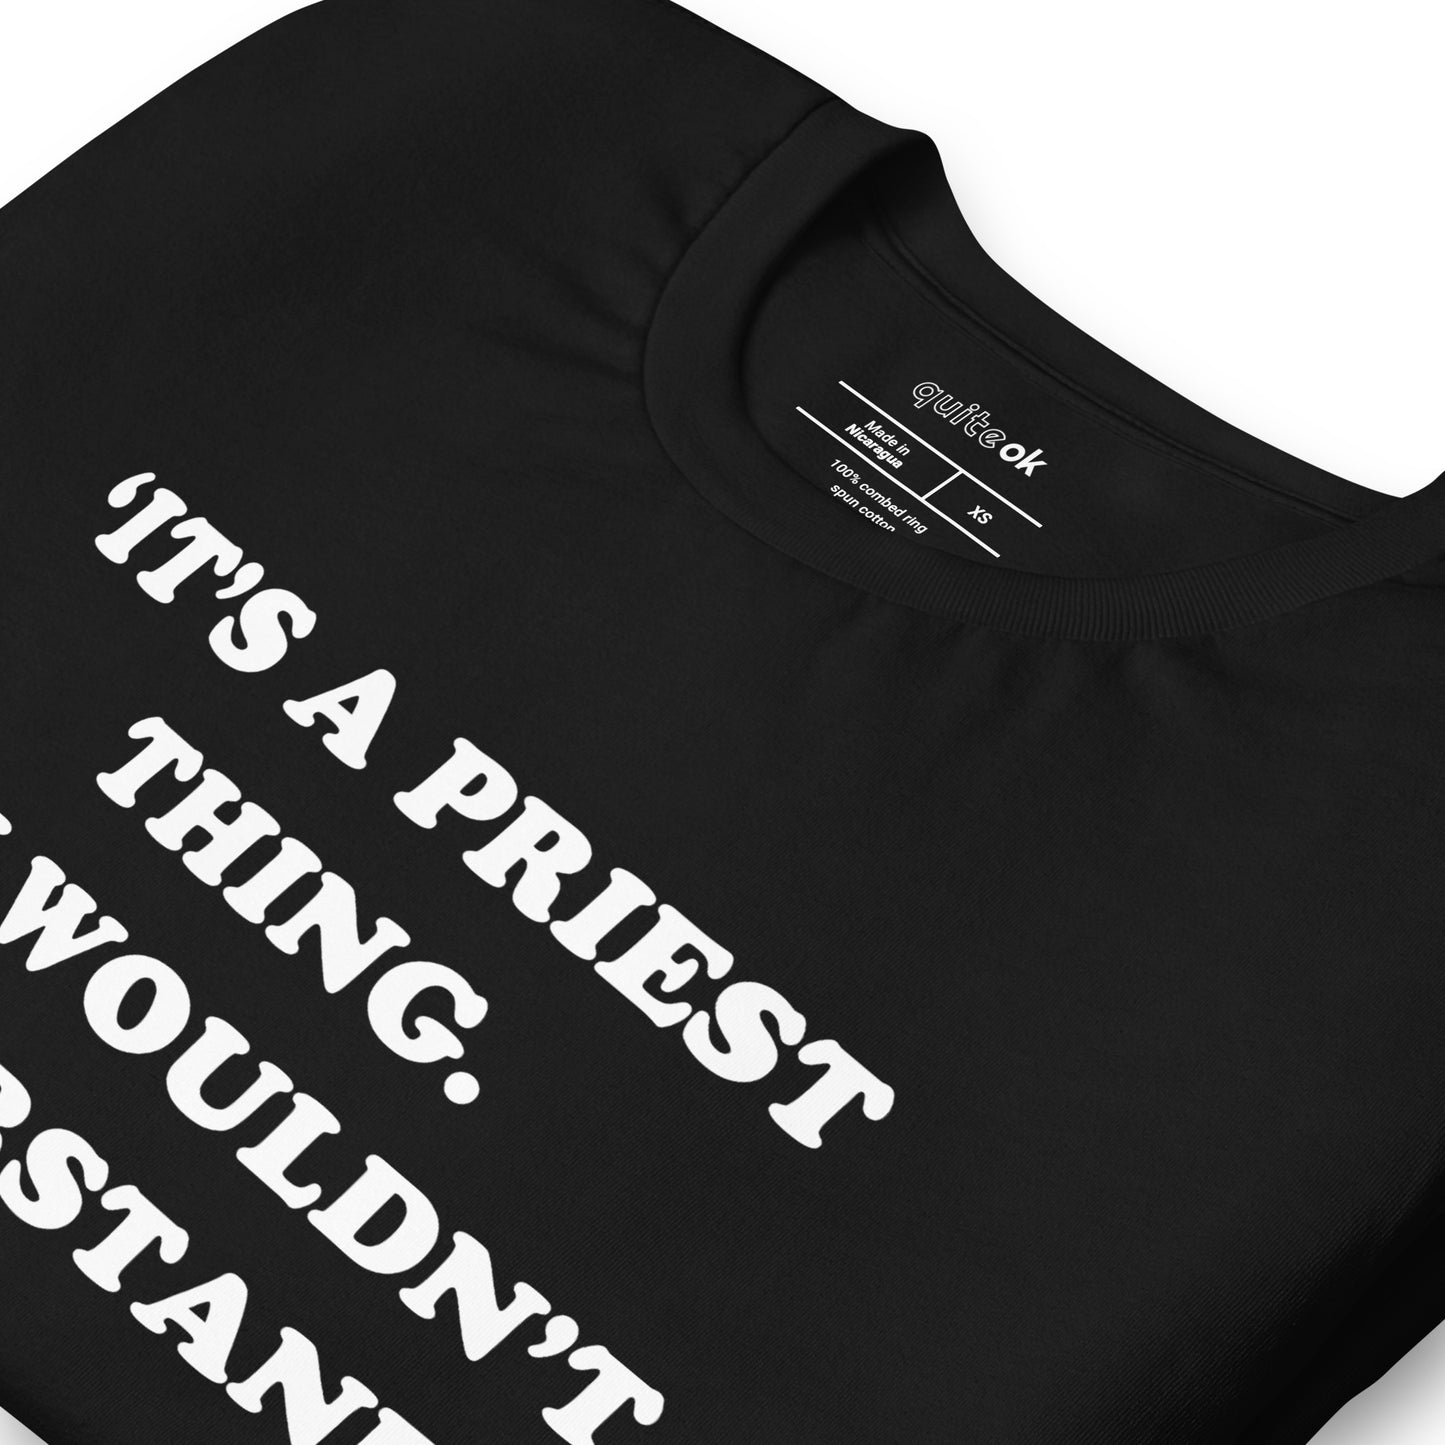 It's a Priest Thing You Wouldn't Understand Comedy T-Shirt